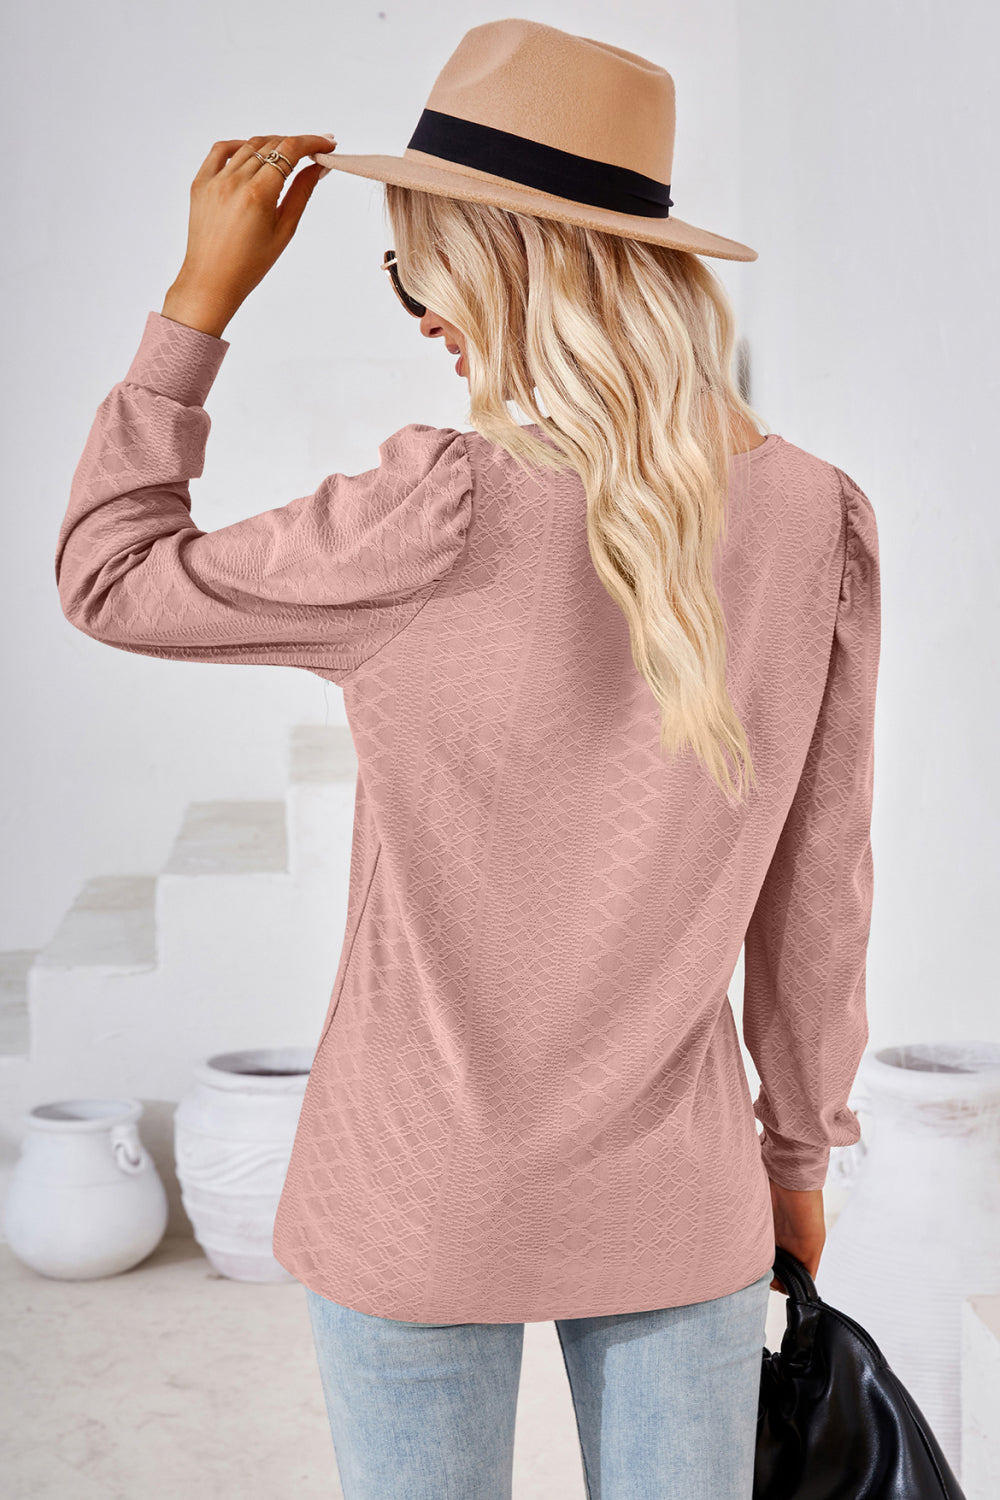 Square Neck Puff Sleeve Blouse - Women’s Clothing & Accessories - Shirts & Tops - 24 - 2024